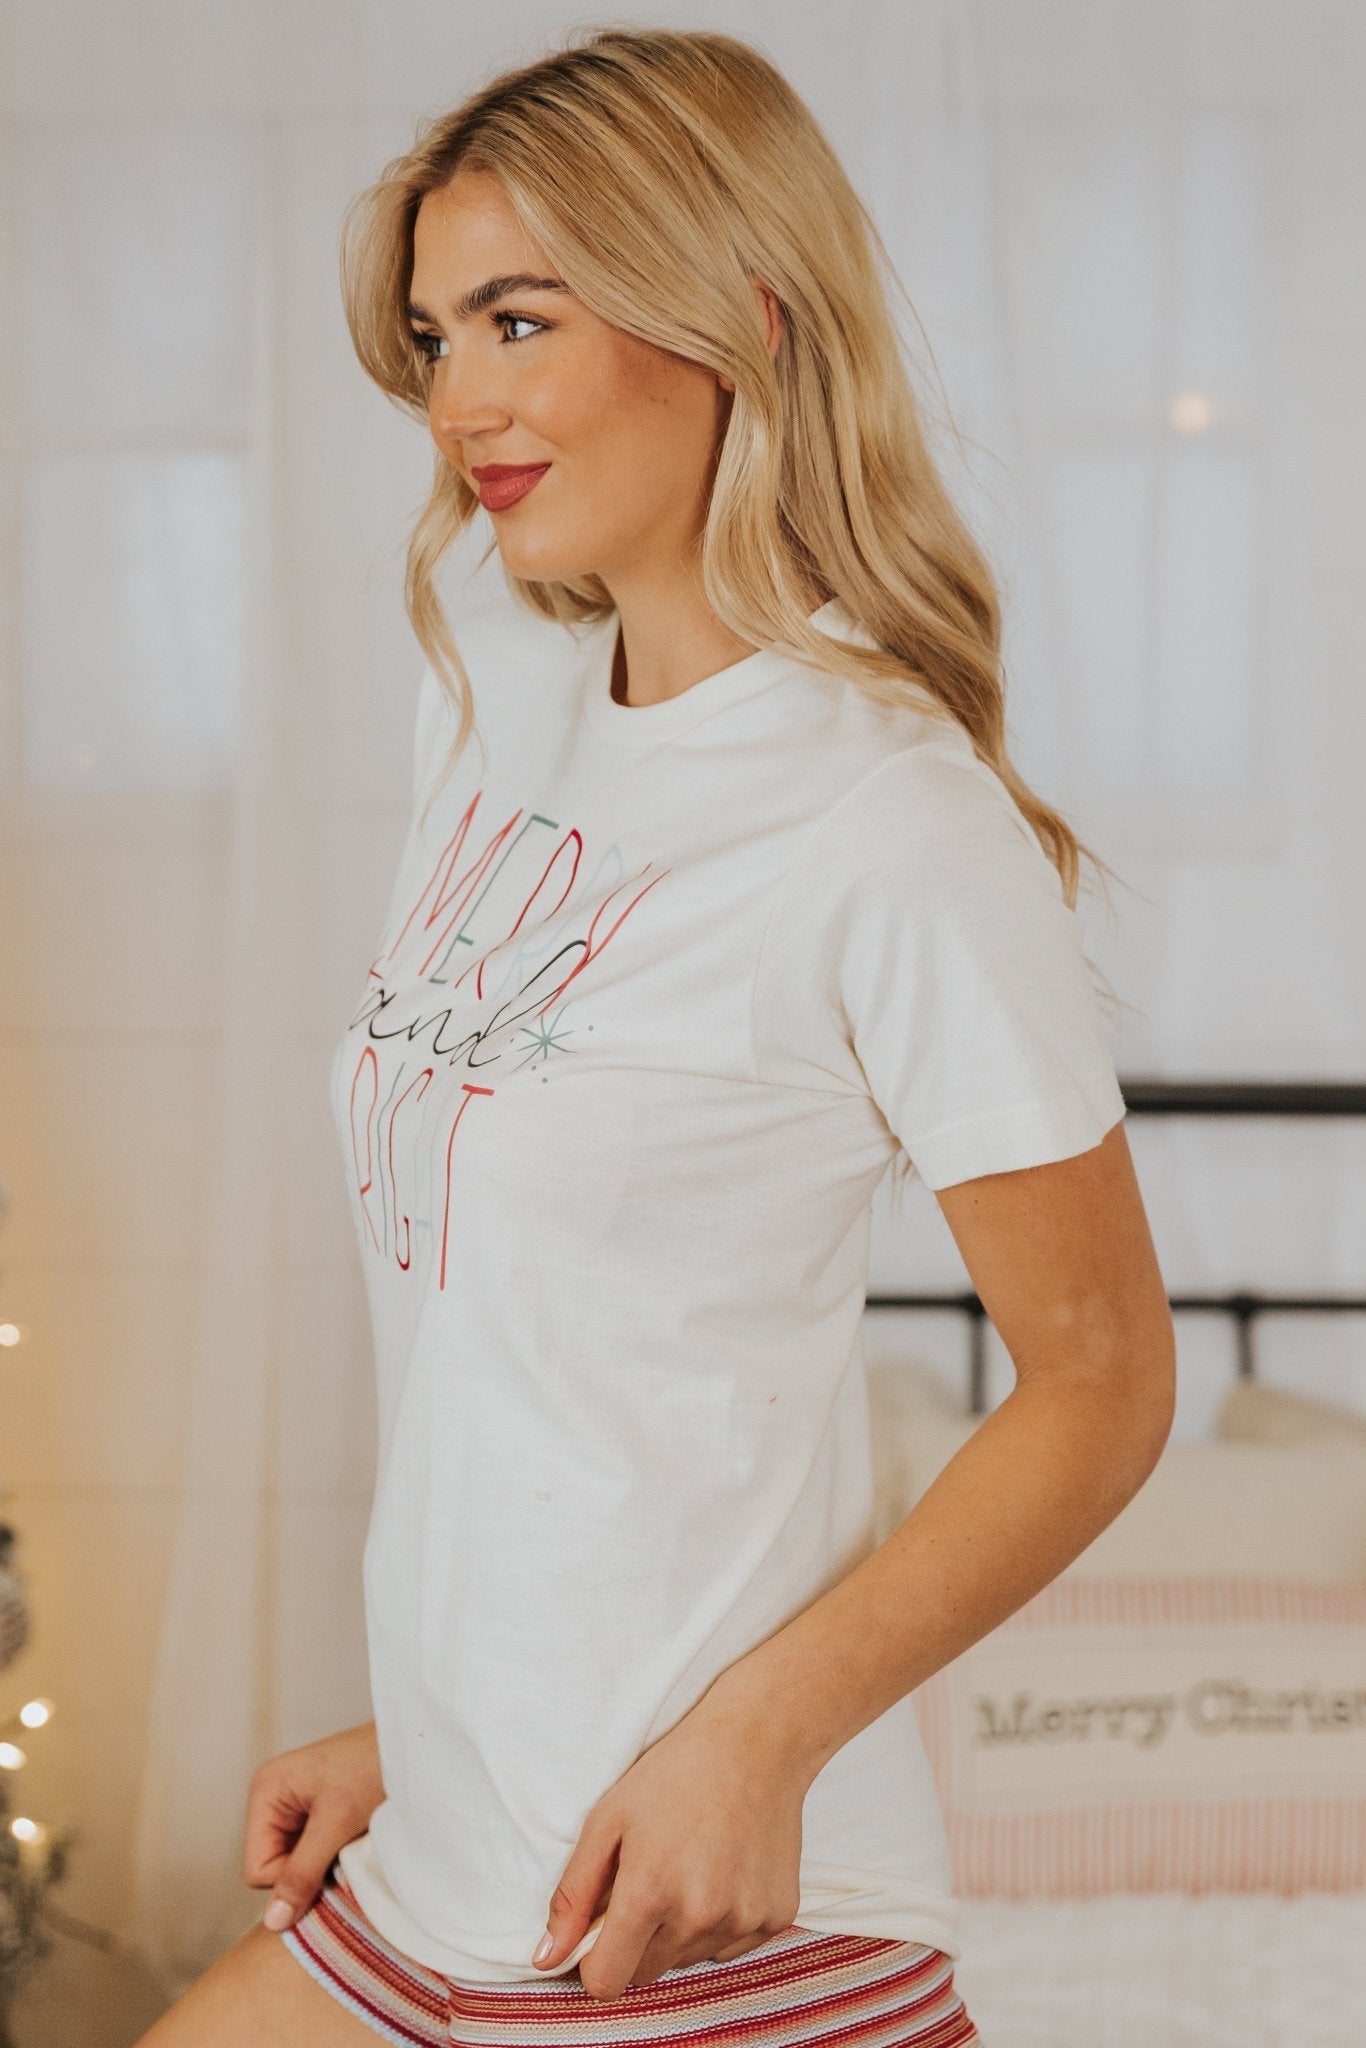 "Merry and Bright" Short Sleeve Graphic Tee - Magnolia Boutique